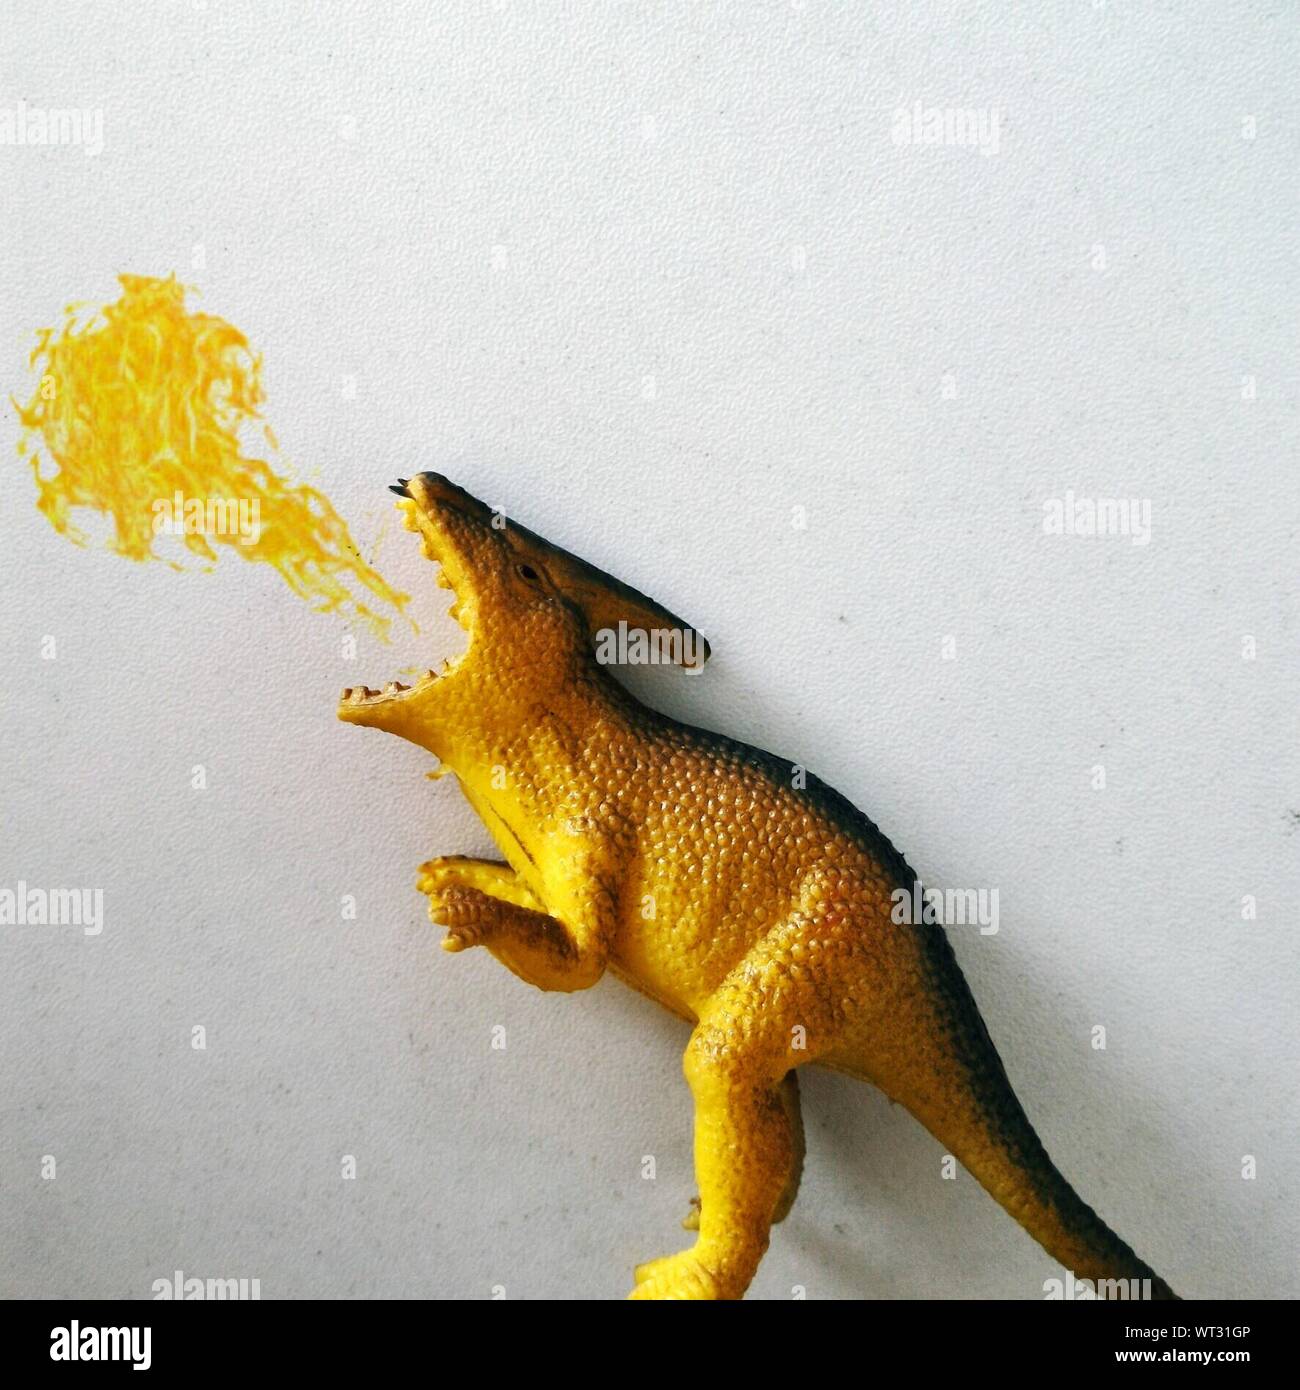 Optical Illusion Of Dinosaur Blowing Fire Against Wall Stock Photo